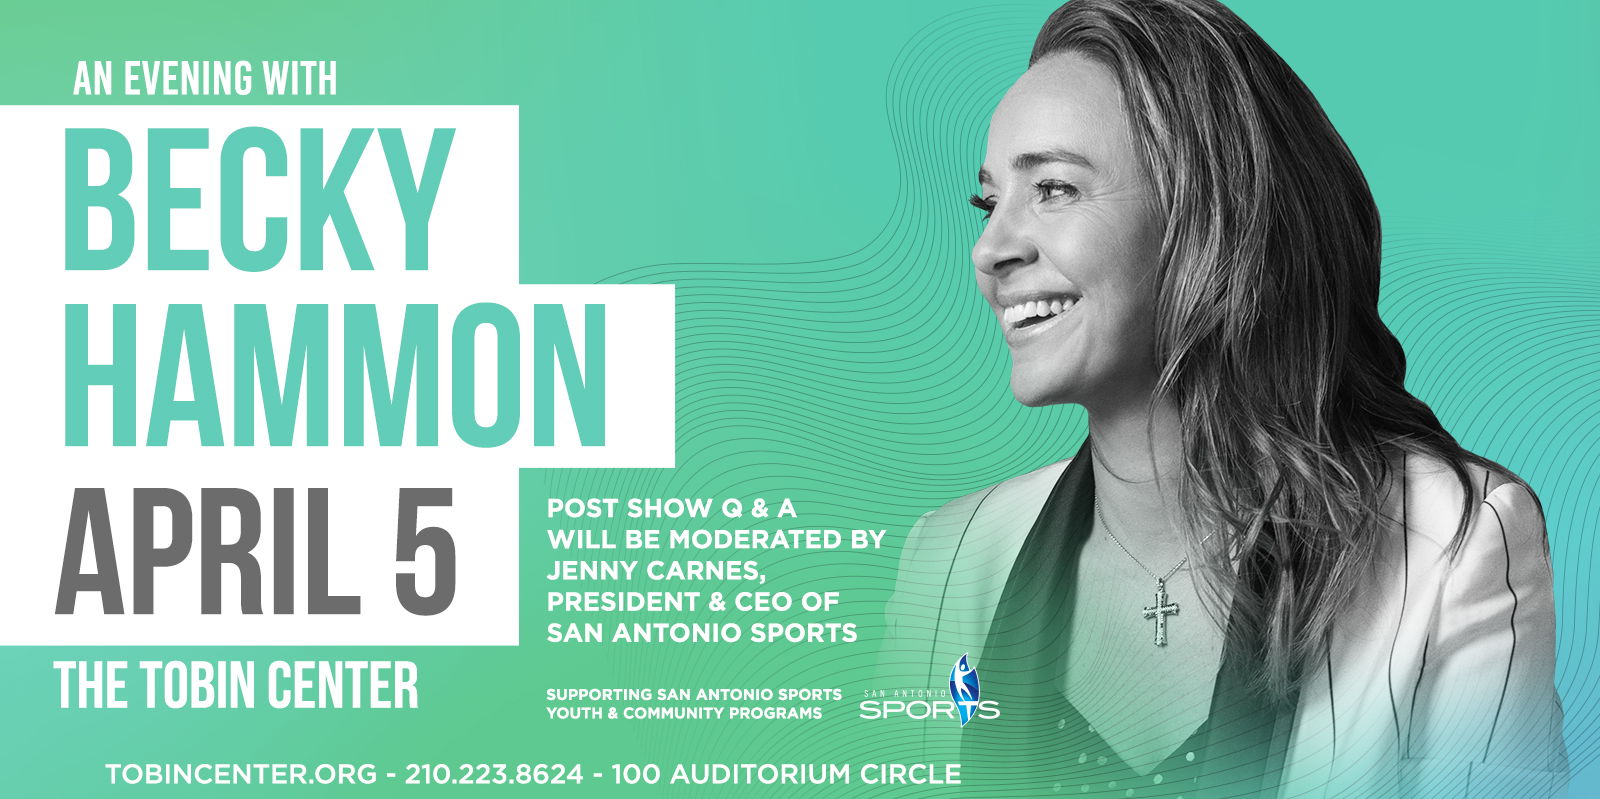 An Evening with Becky Hammon promotional image